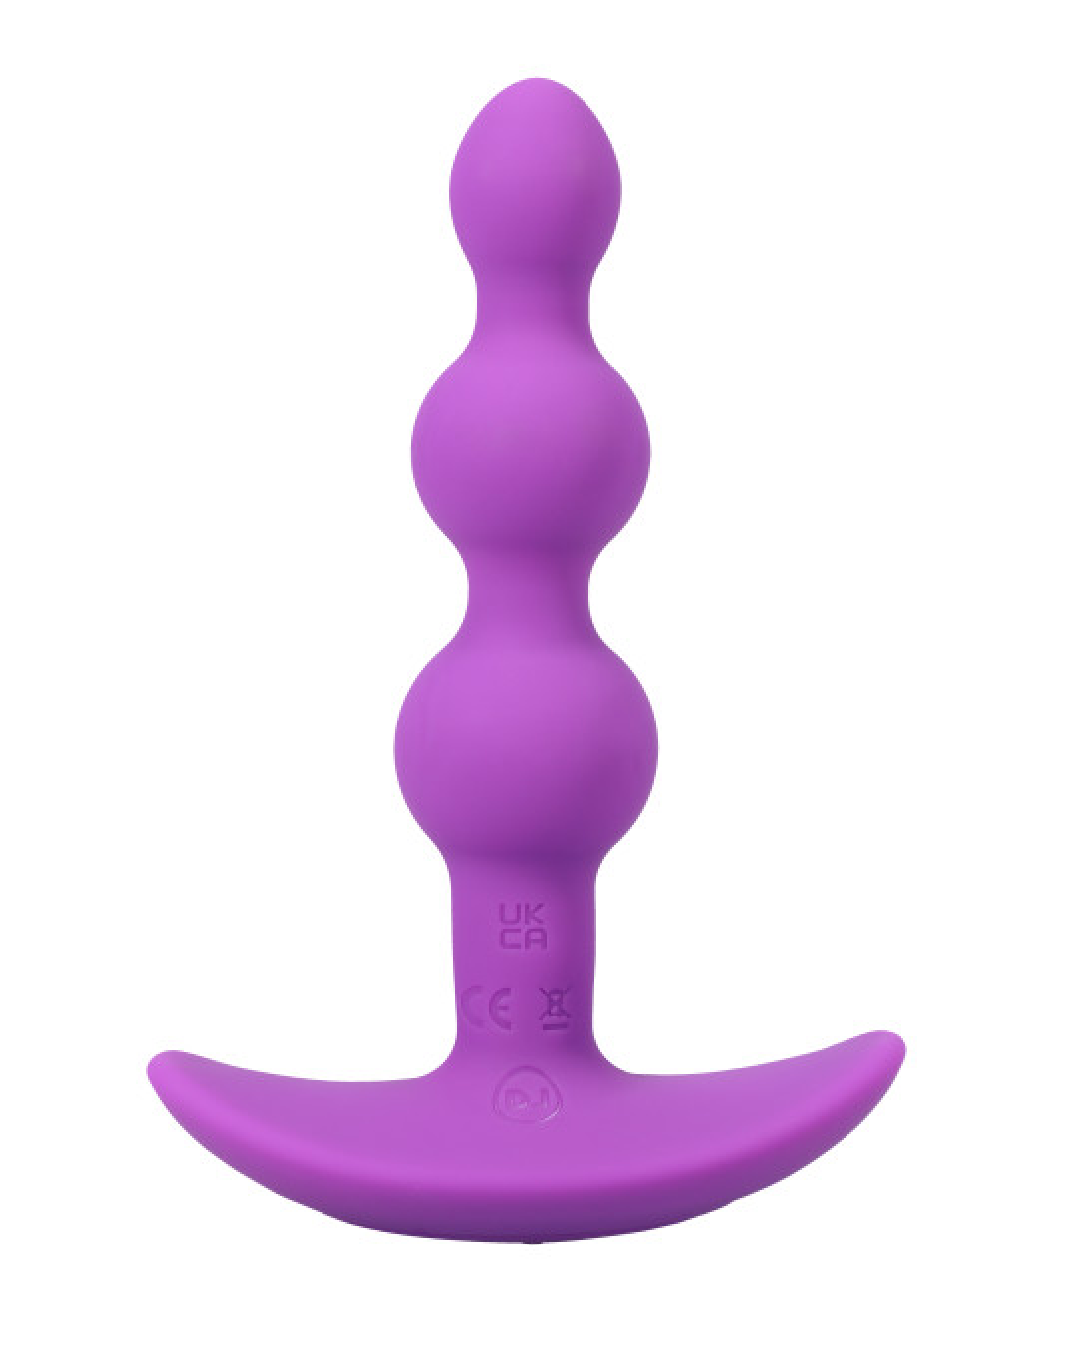 A-Play Beaded Vibrating Anal Beads with Remote - Purple